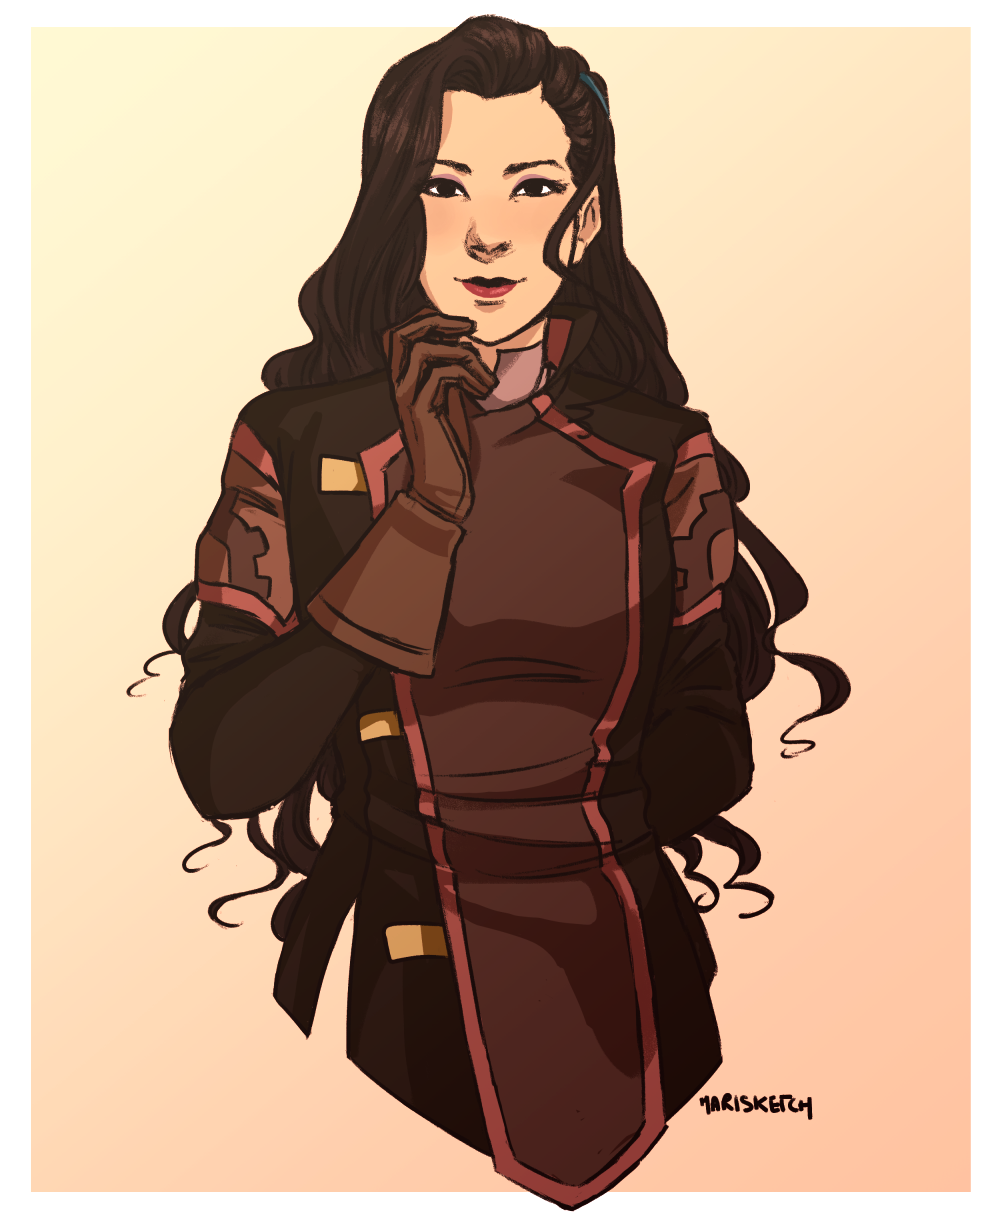 marisketch: So it turns out Asami’s a lot of fun to draw.